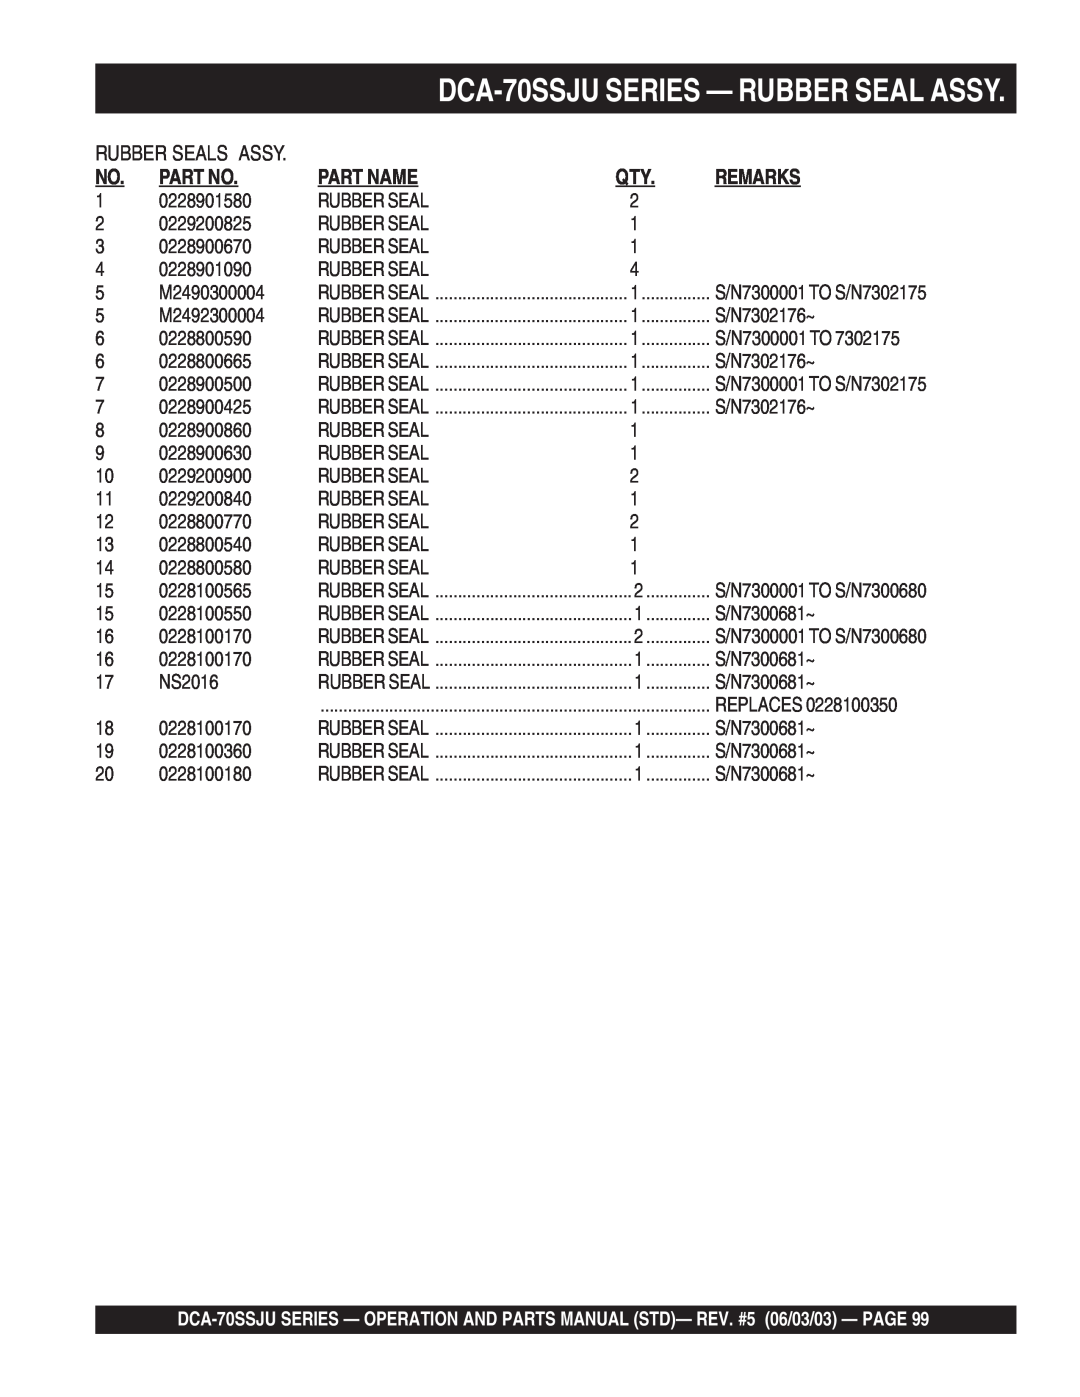 Multiquip operation manual DCA-70SSJUSERIES — RUBBER SEAL ASSY, Part No, Remarks, Part Name 